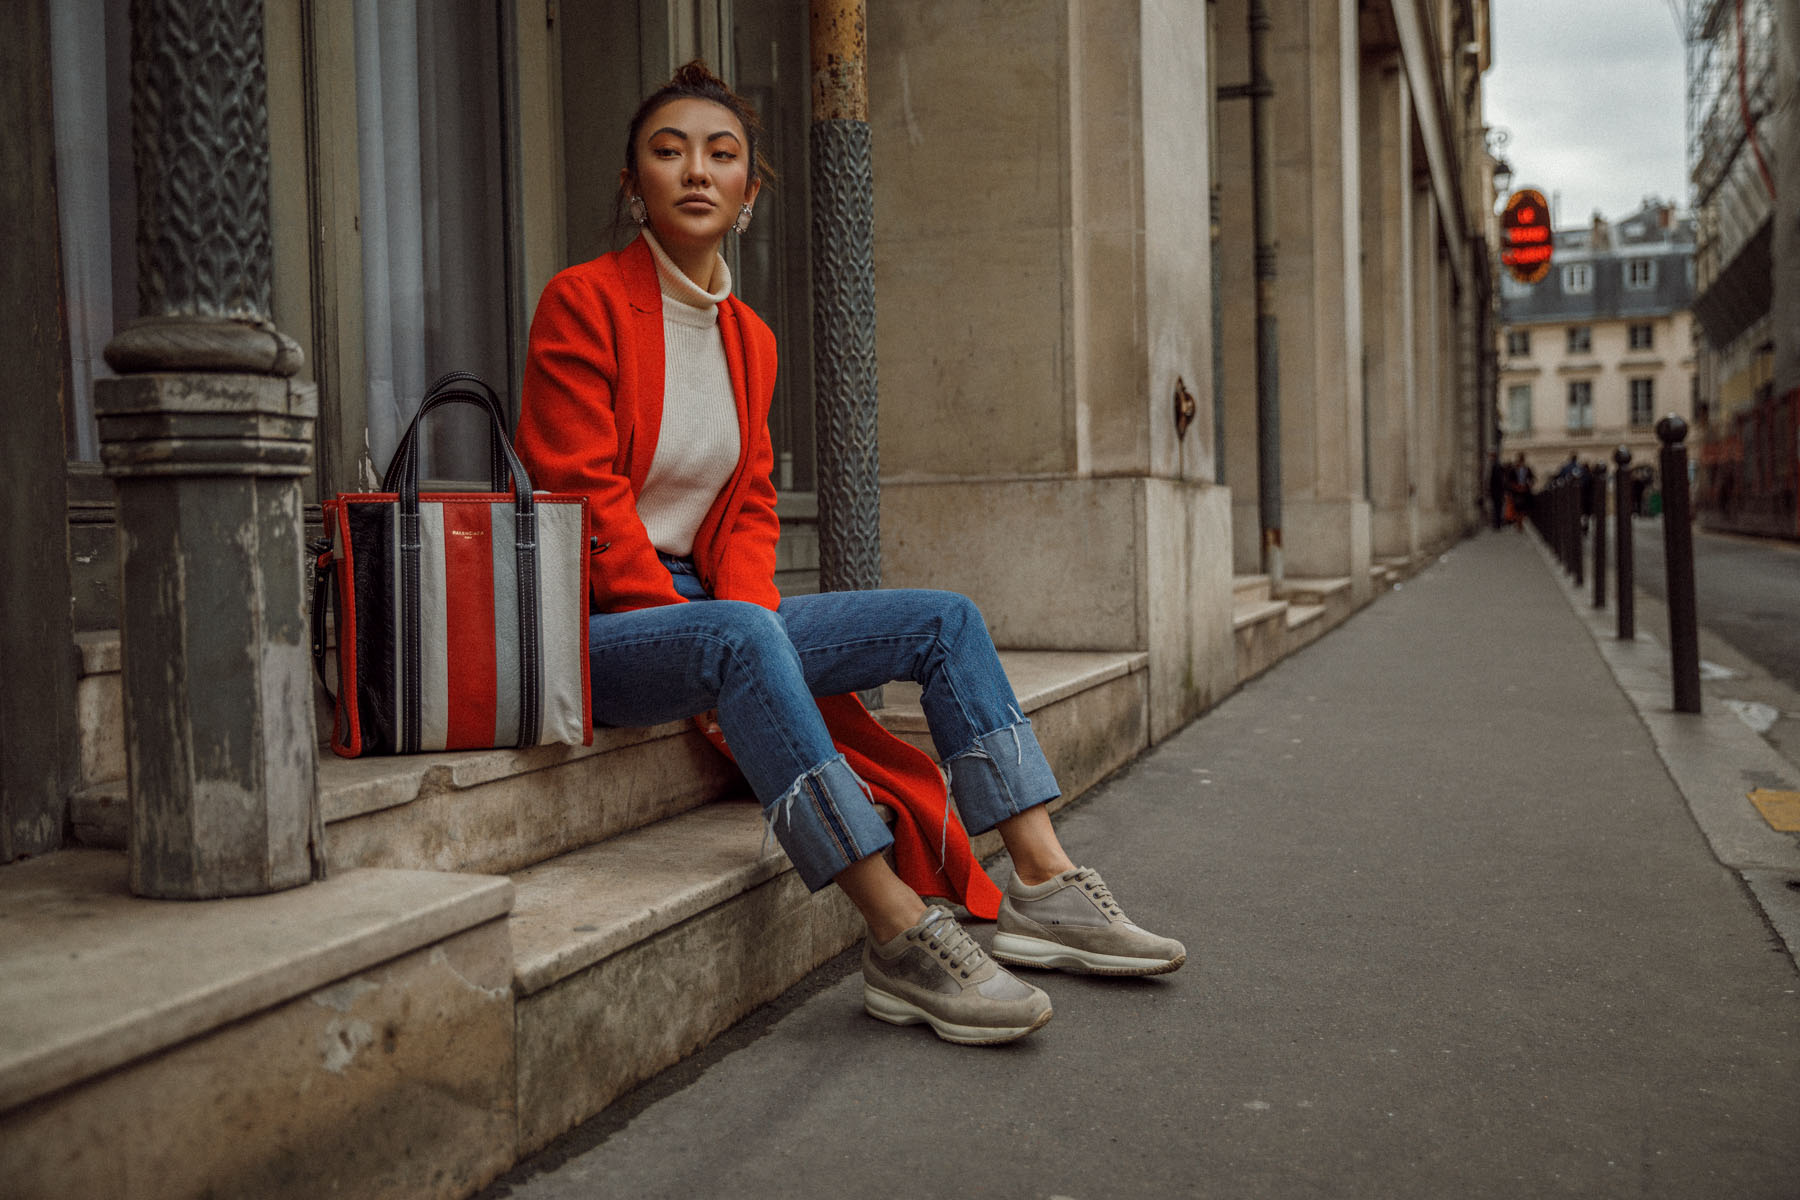 Winter Trends You Can Still Wear In Spring - Bright red coat, cuffed jeans, balenciaga bazar shopper, jessica wang in paris, pfw street style // Notjessfashion.com